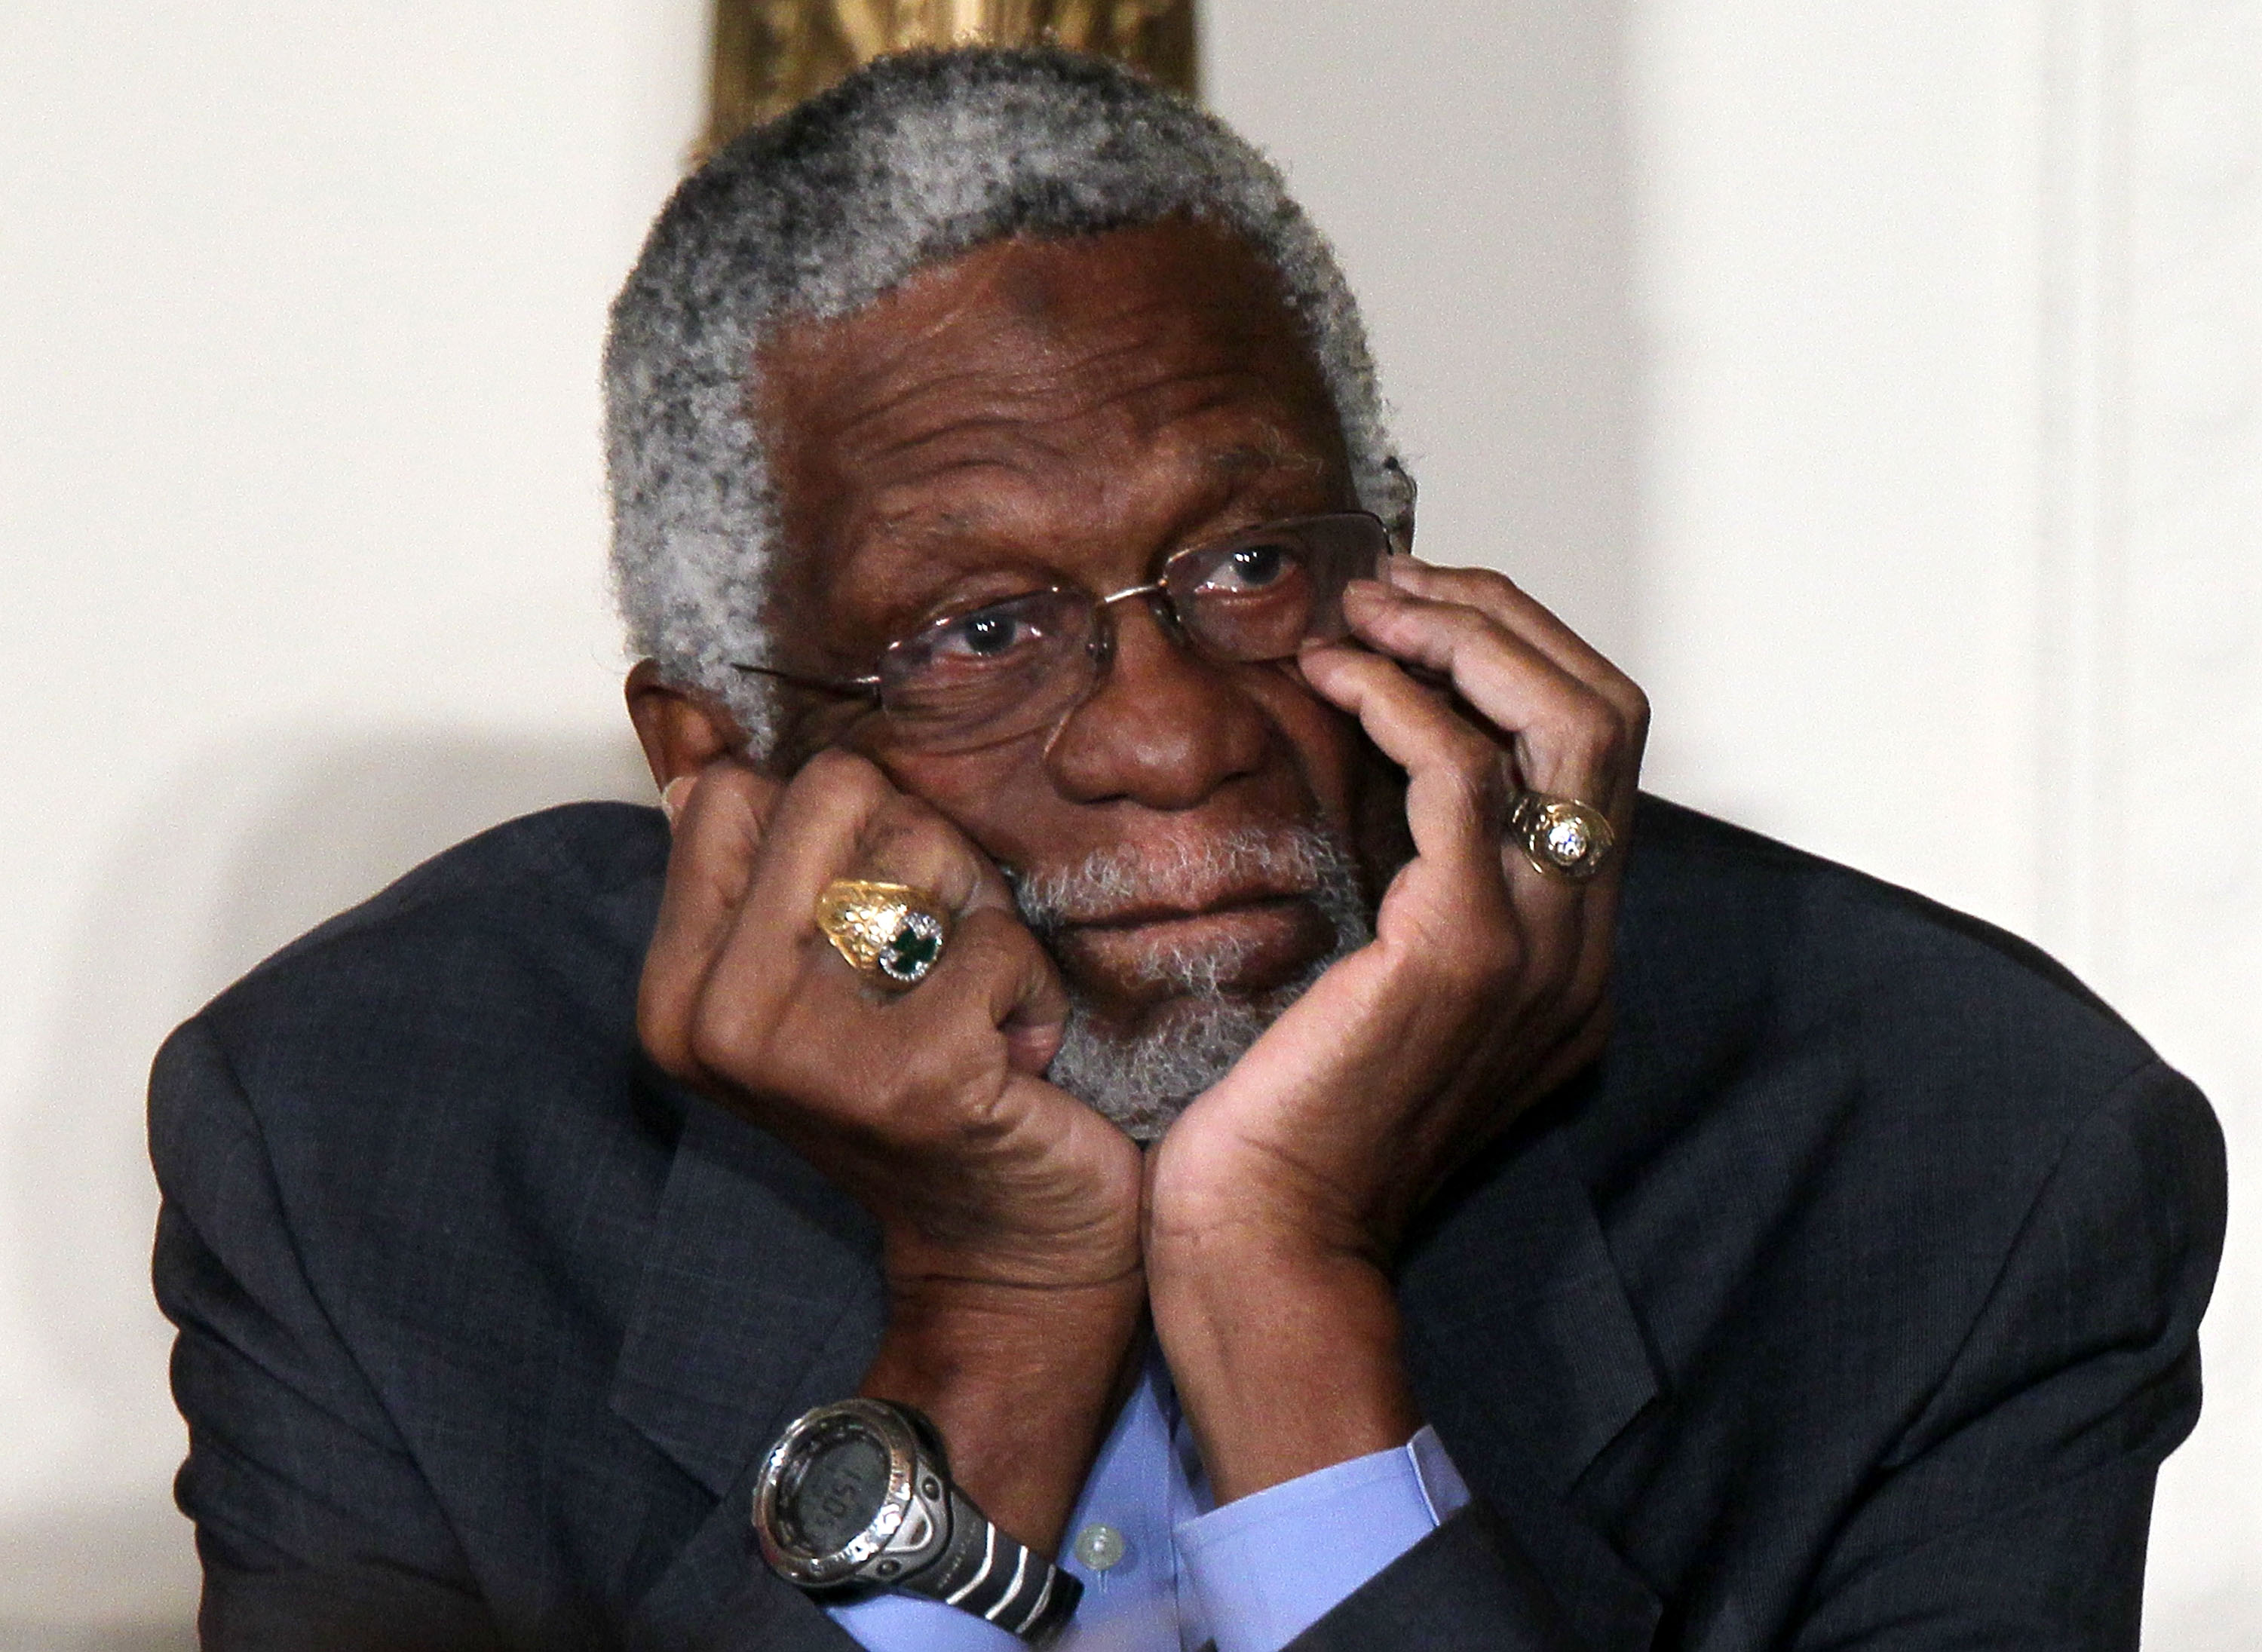 Bill Russell listens during the 2010 Medal of Freedom presentation ceremony at the East Room of the White House on February 15, 2011, in Washington, DC. | Source: Getty Images